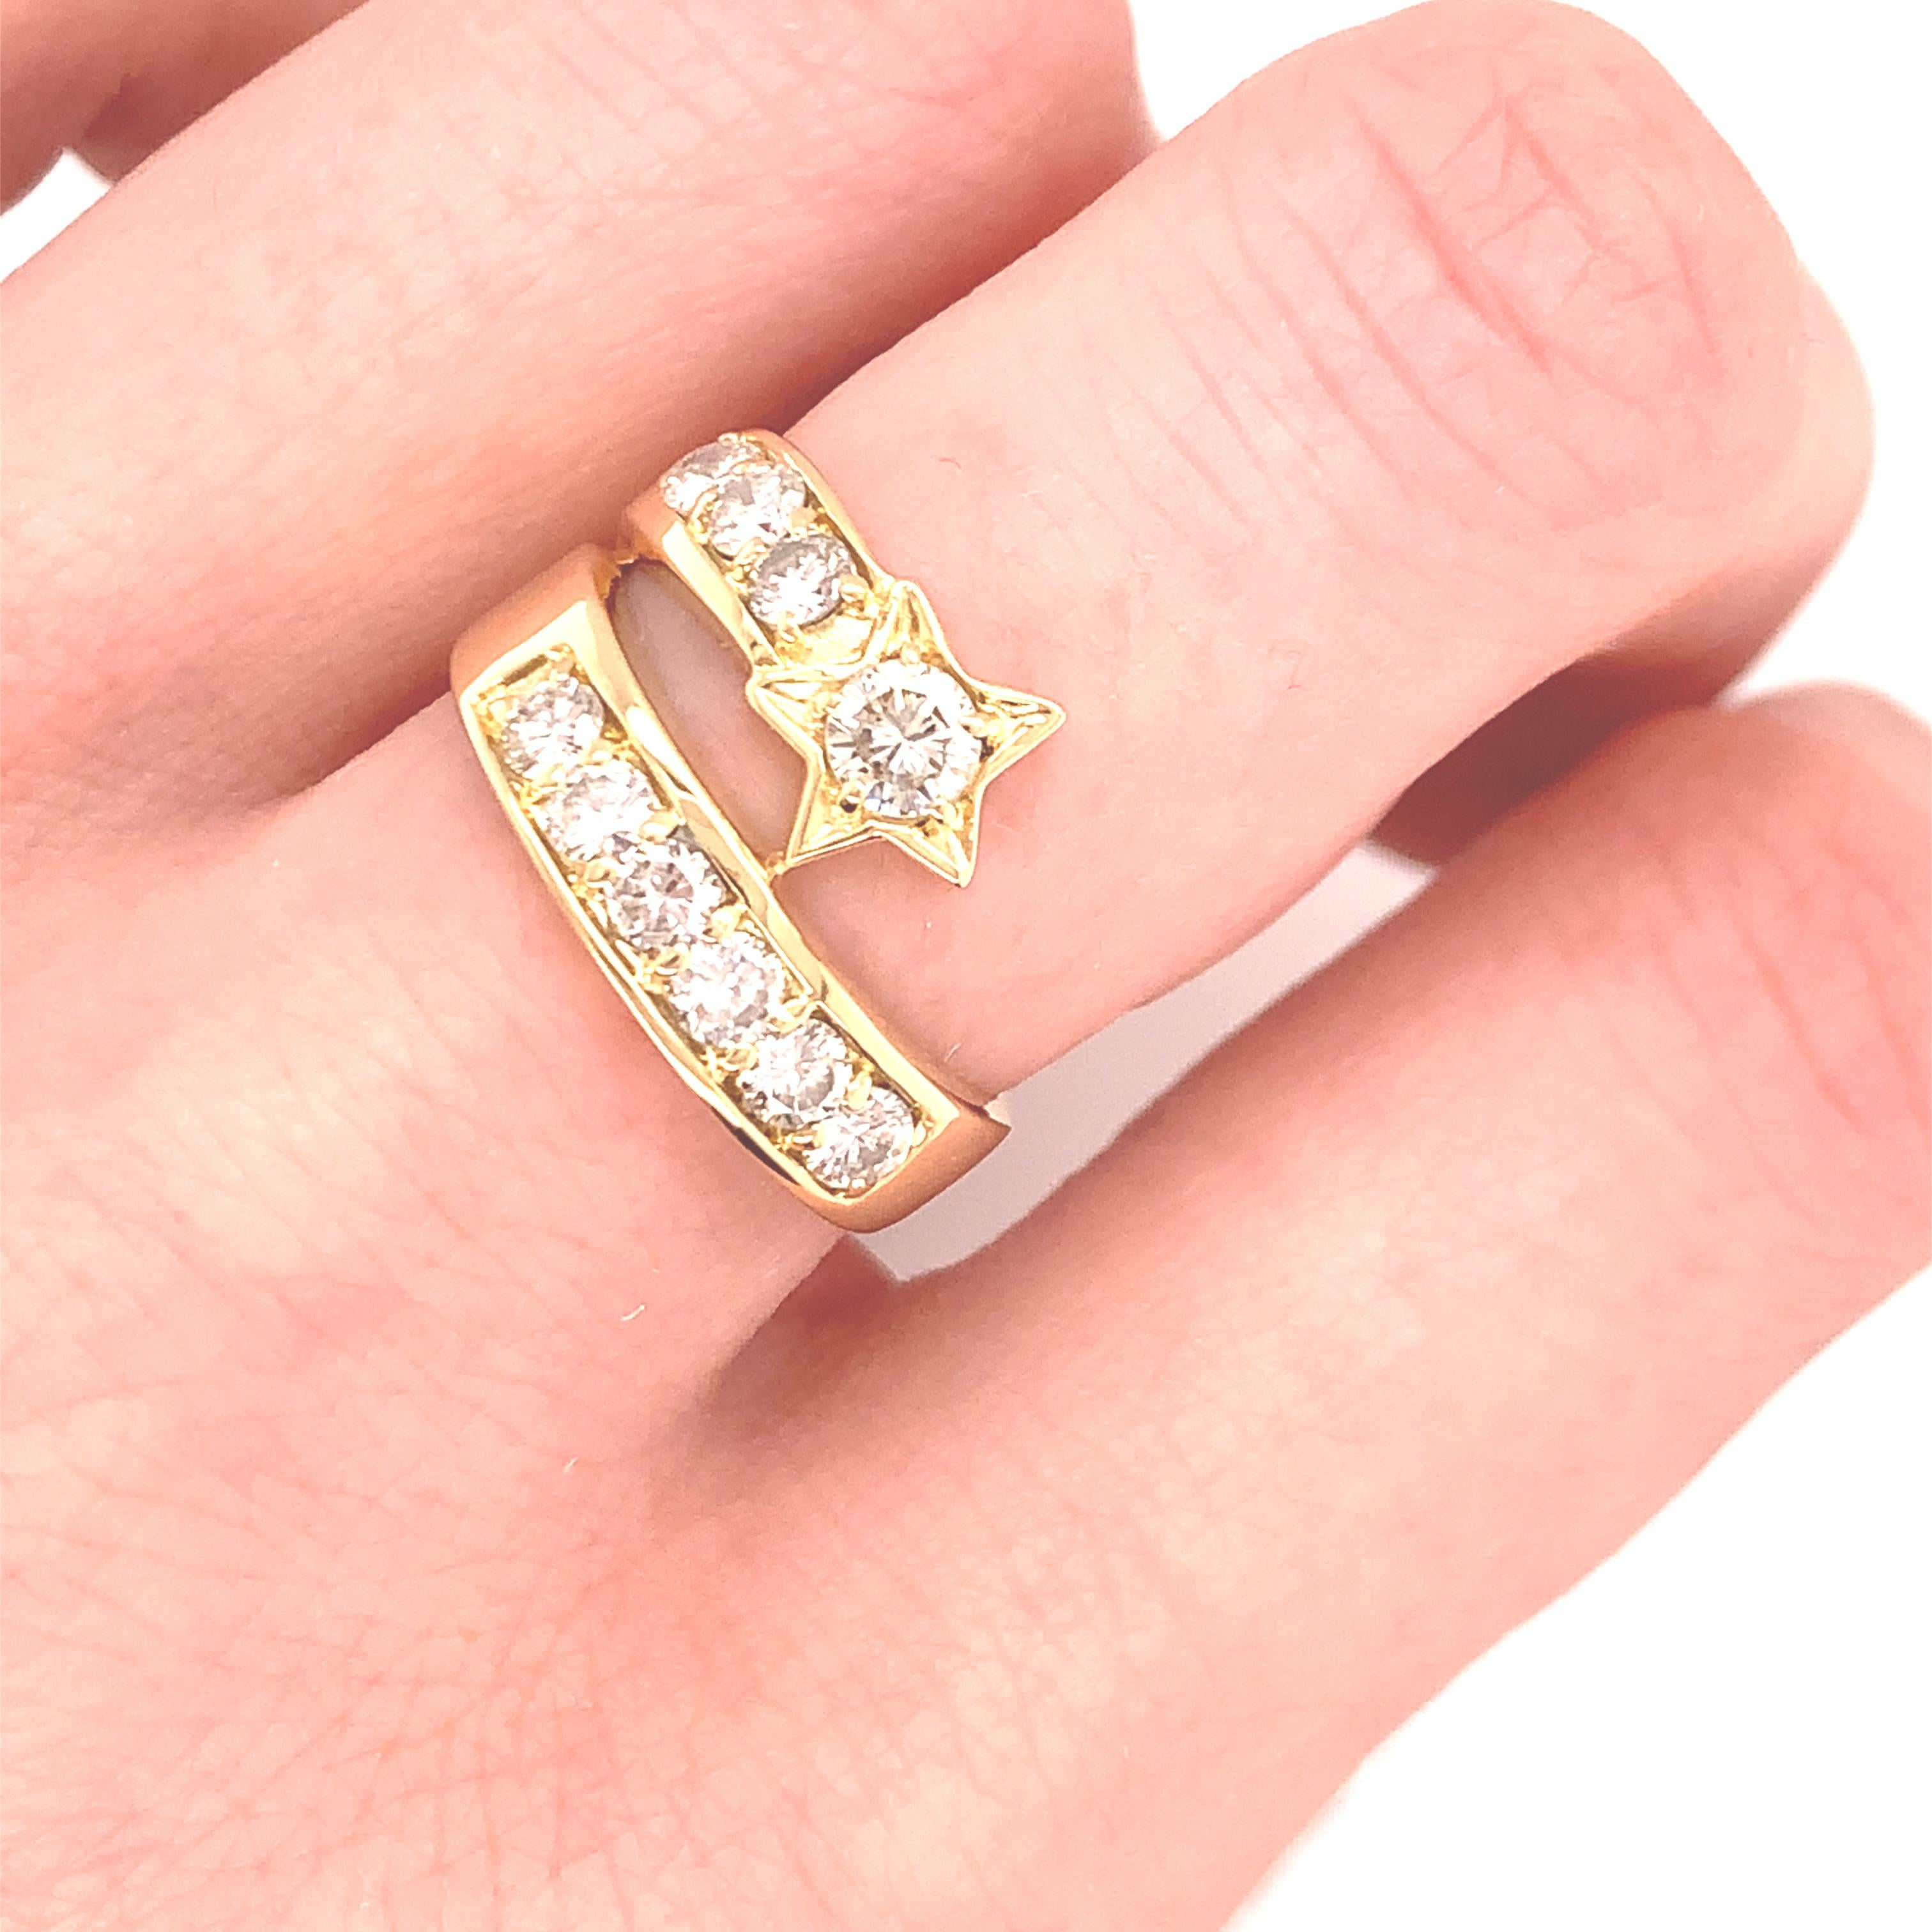 Striking and unique ring: a gold and diamond shooting star that wraps around the finger.  18K yellow gold; approximately 1.00 carat of brilliant diamonds, G-H color, VS clarity.  Size 7 and can be custom sized.  Very eye-catching and fun to